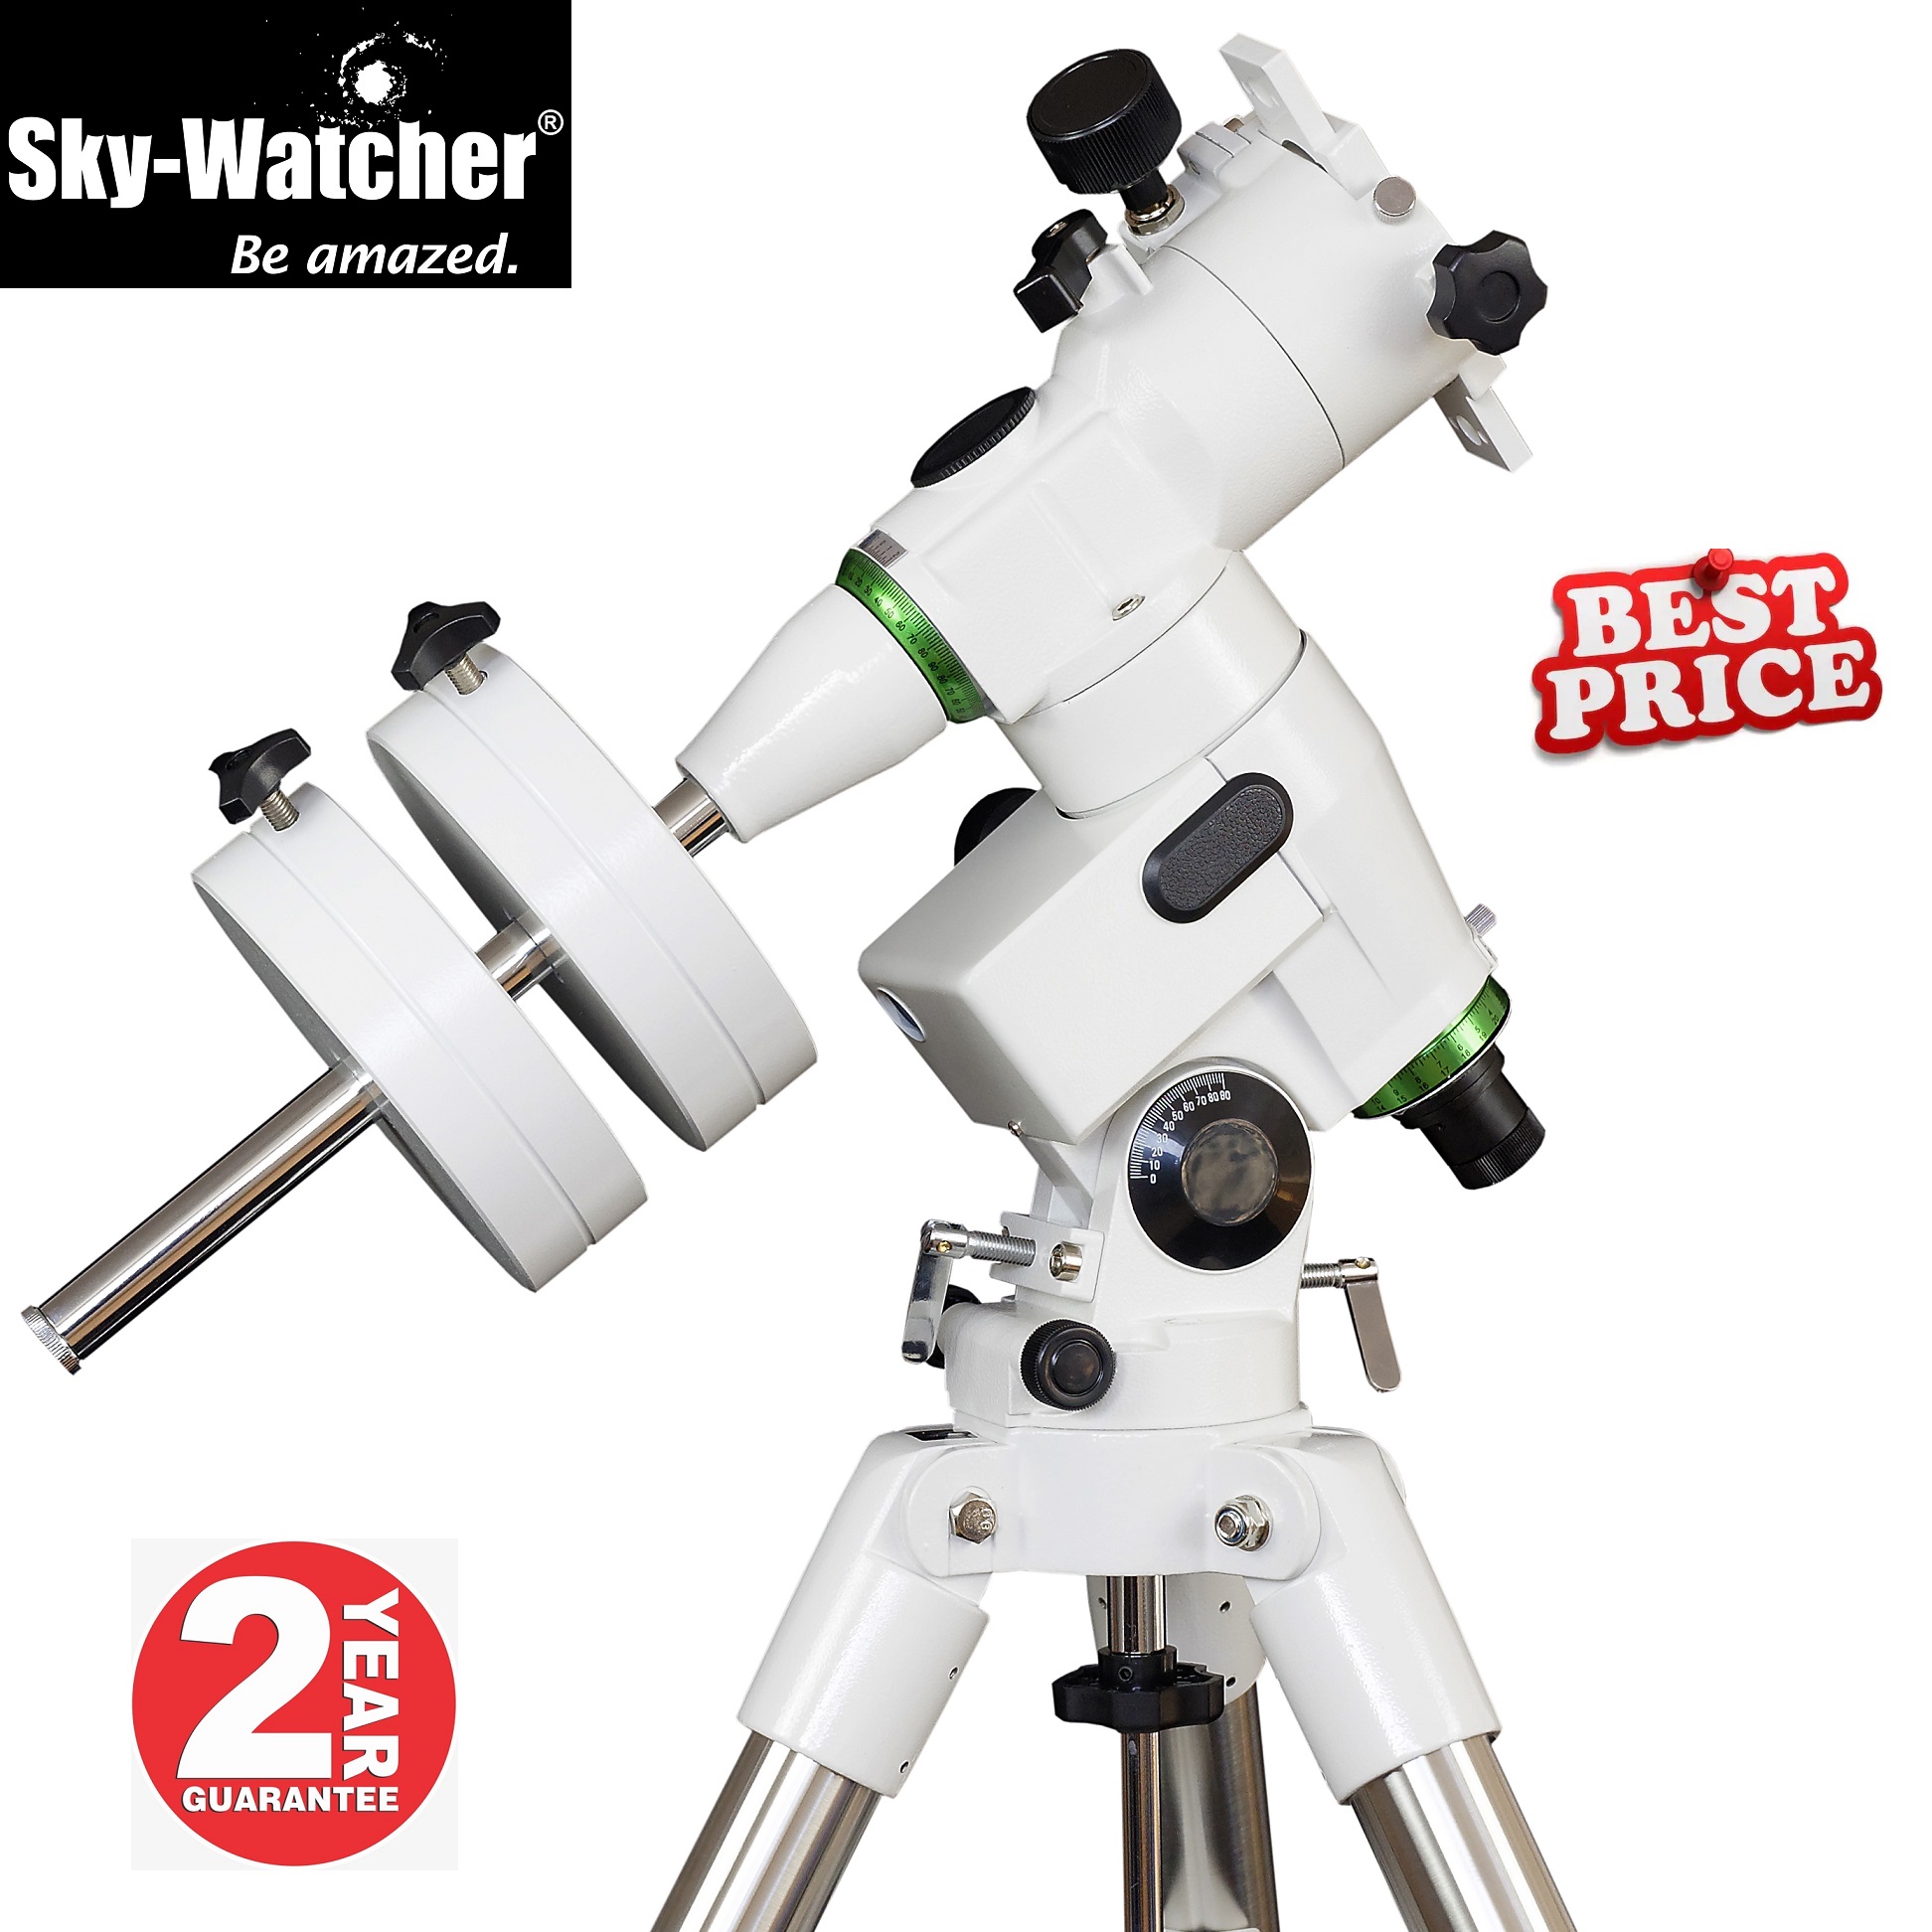 SkyWatcher EQ5 Deluxe Heavy-Duty Equatorial Mount With Tripod